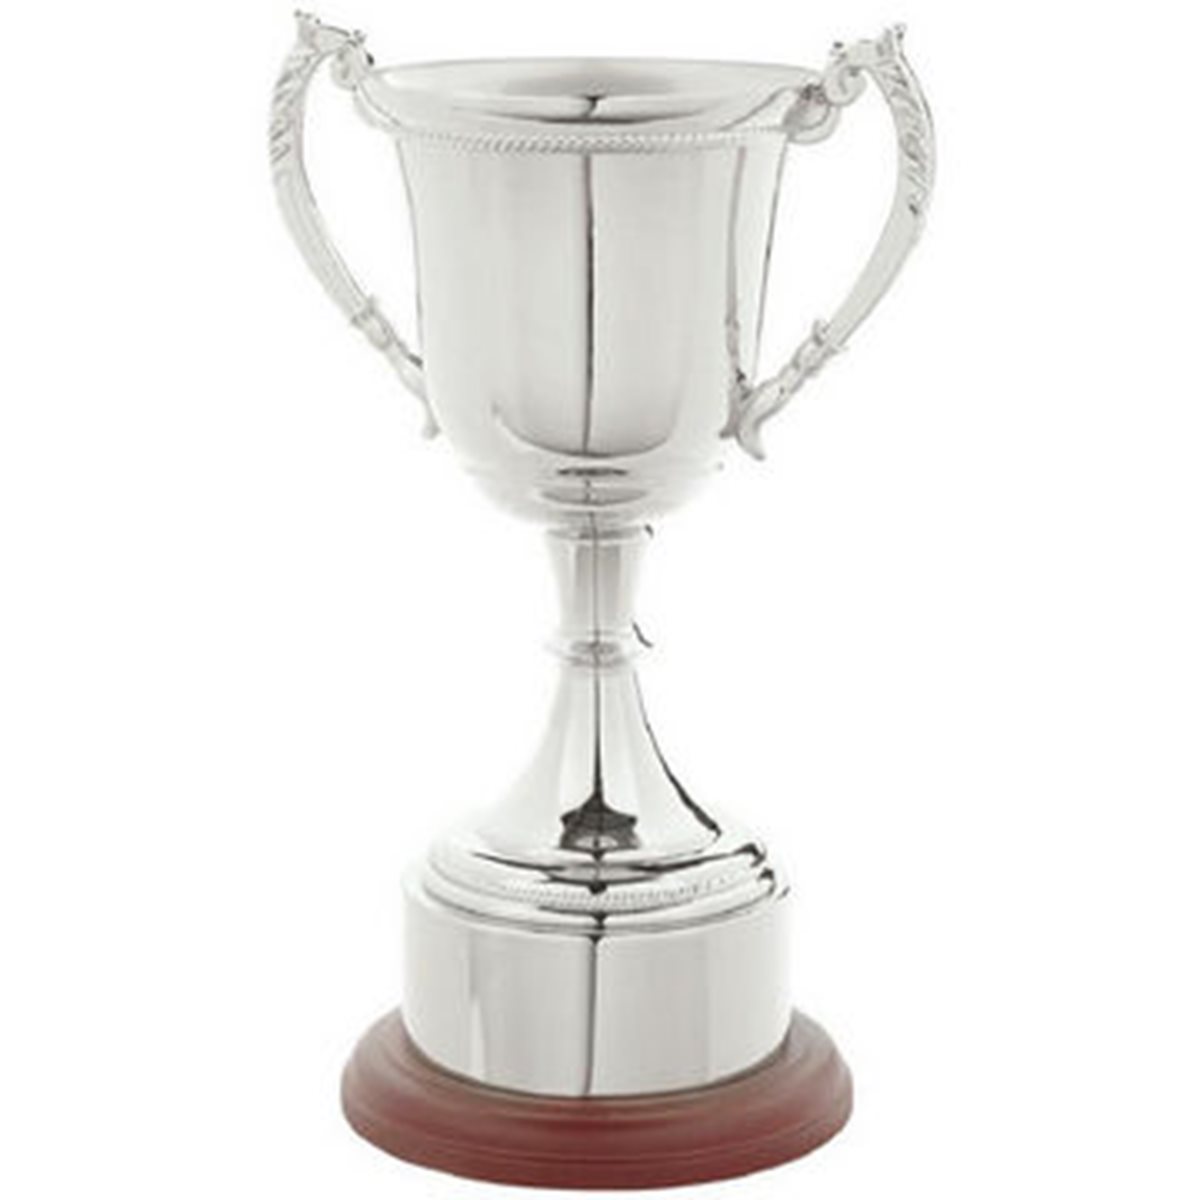 Silver Nickel Plated Cup on Round Wooden Base SV810 - 35cm (13.75") and 32cm (12.5") available